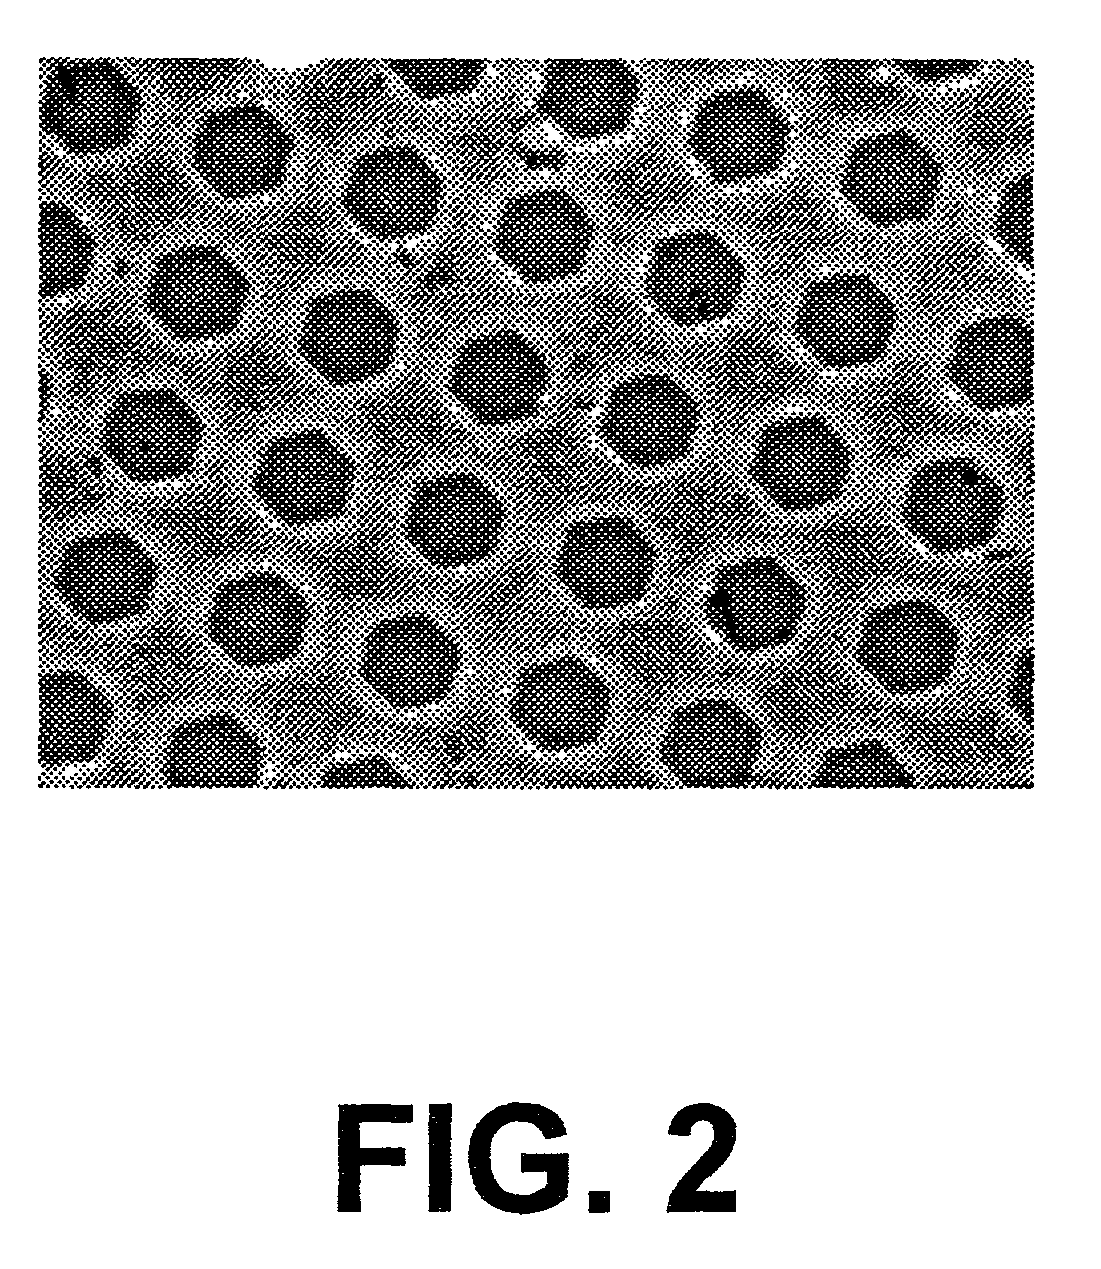 Diffraction-based diagnostic devices